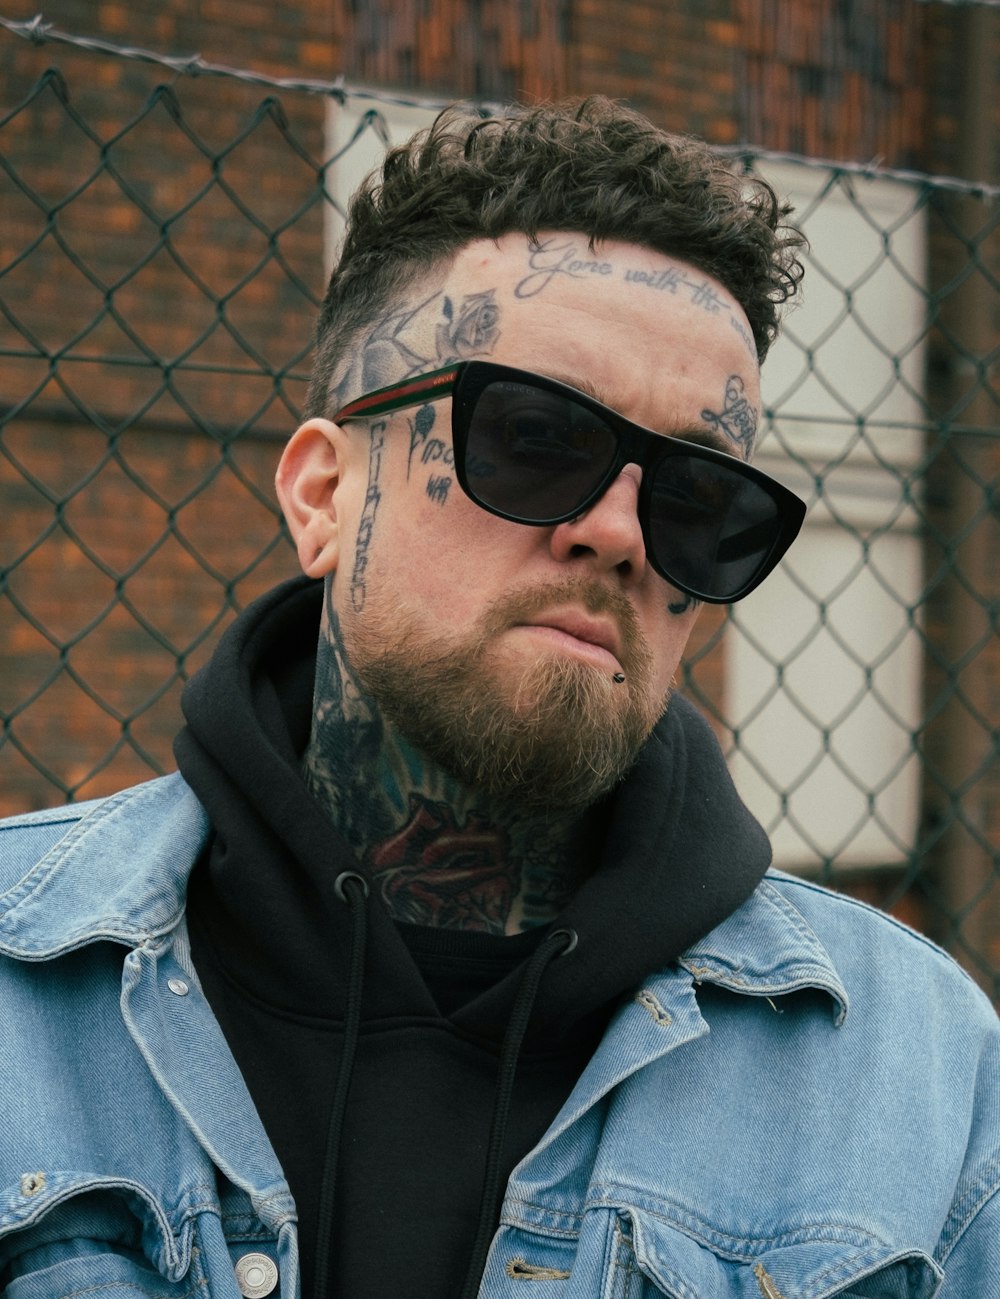 a man with a tattoo on his face wearing sunglasses